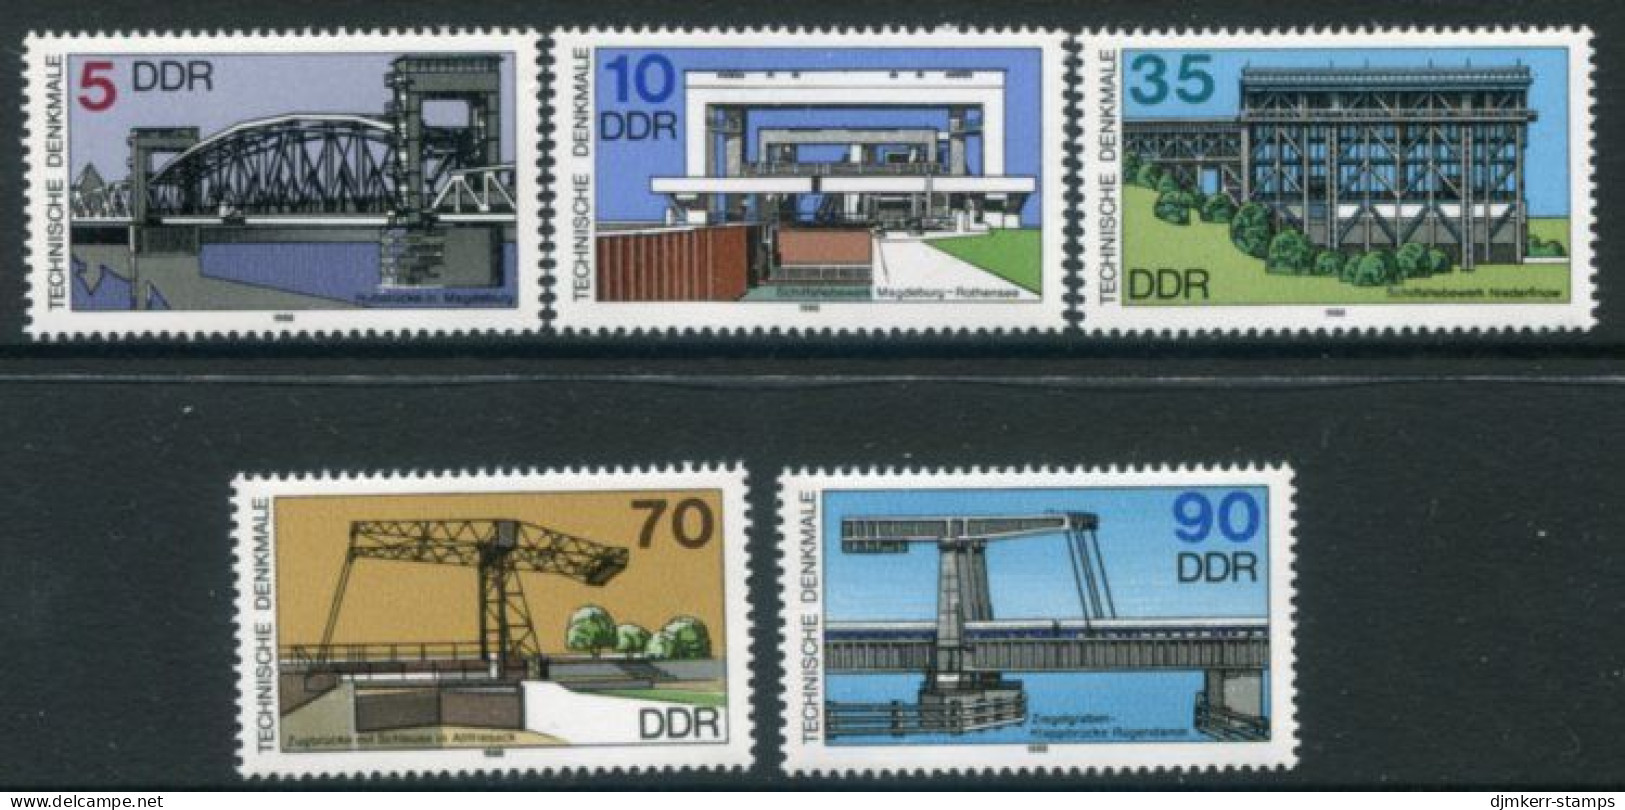 EAST GERMANY / DDR 1988 Ship Lifts MNH / ** .  Michel 3203-07 - Nuovi